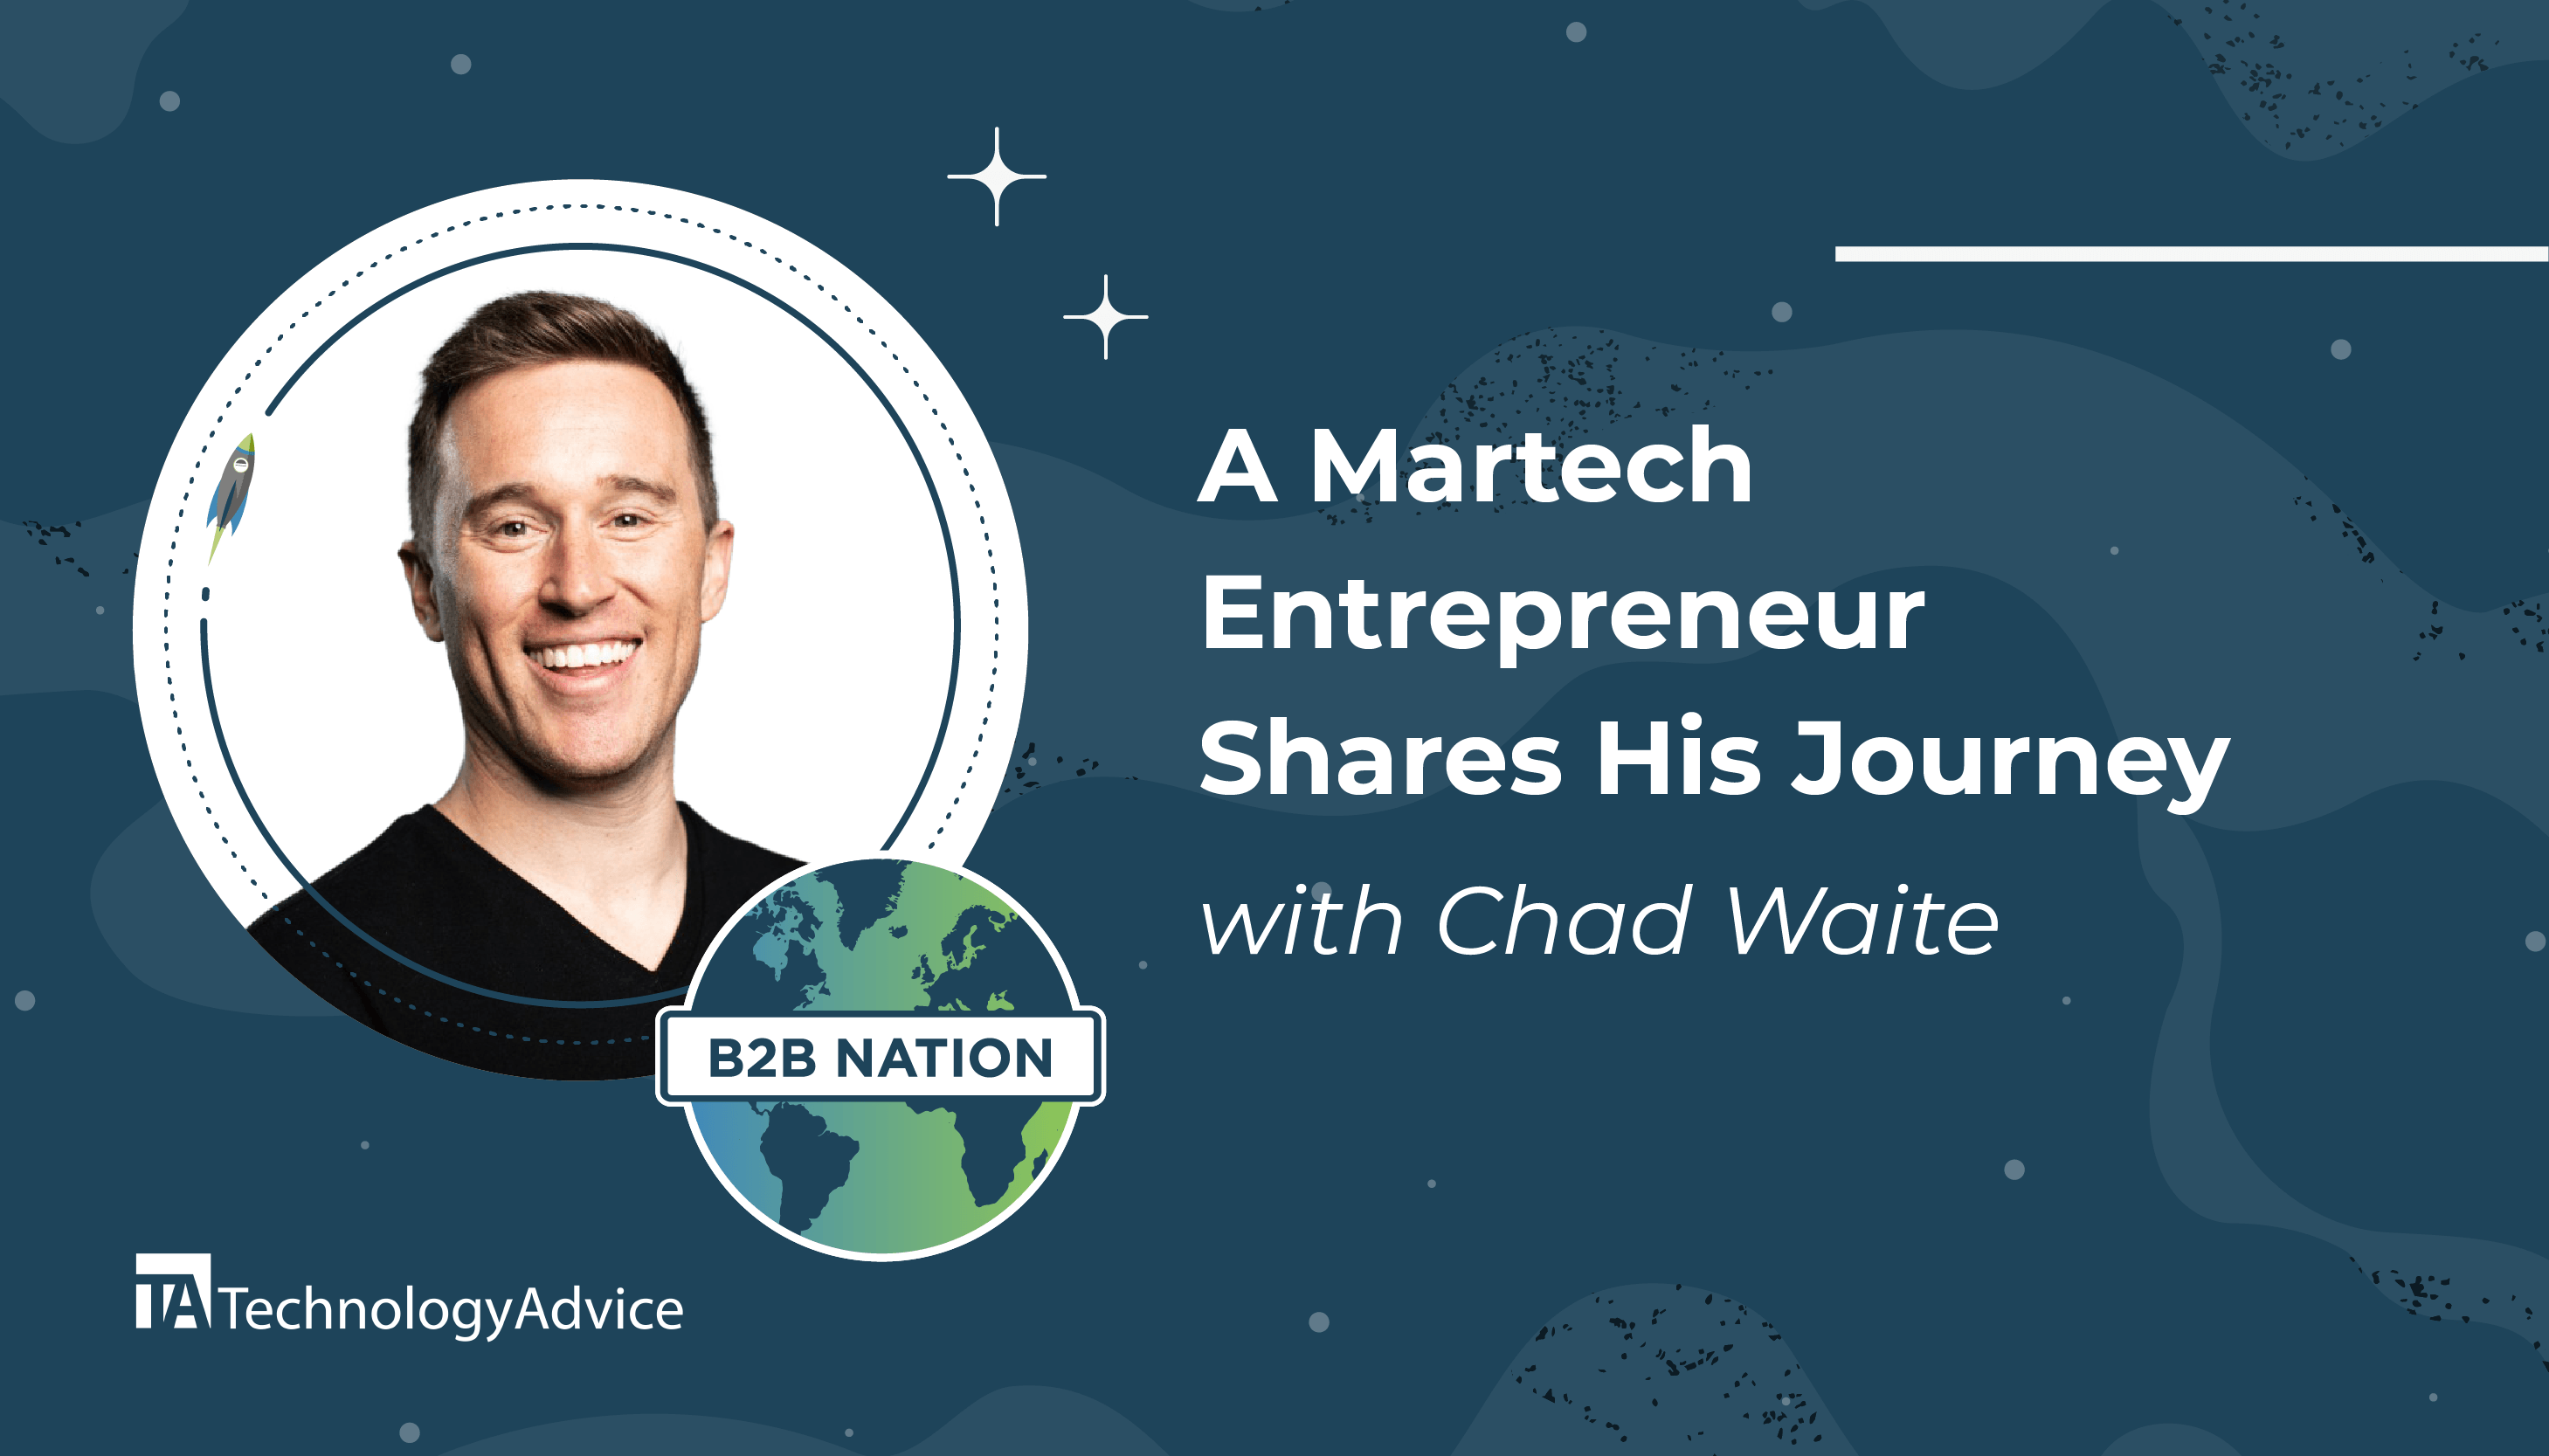 Chat Waite discusses his martech start-up journey on B2B Nation.